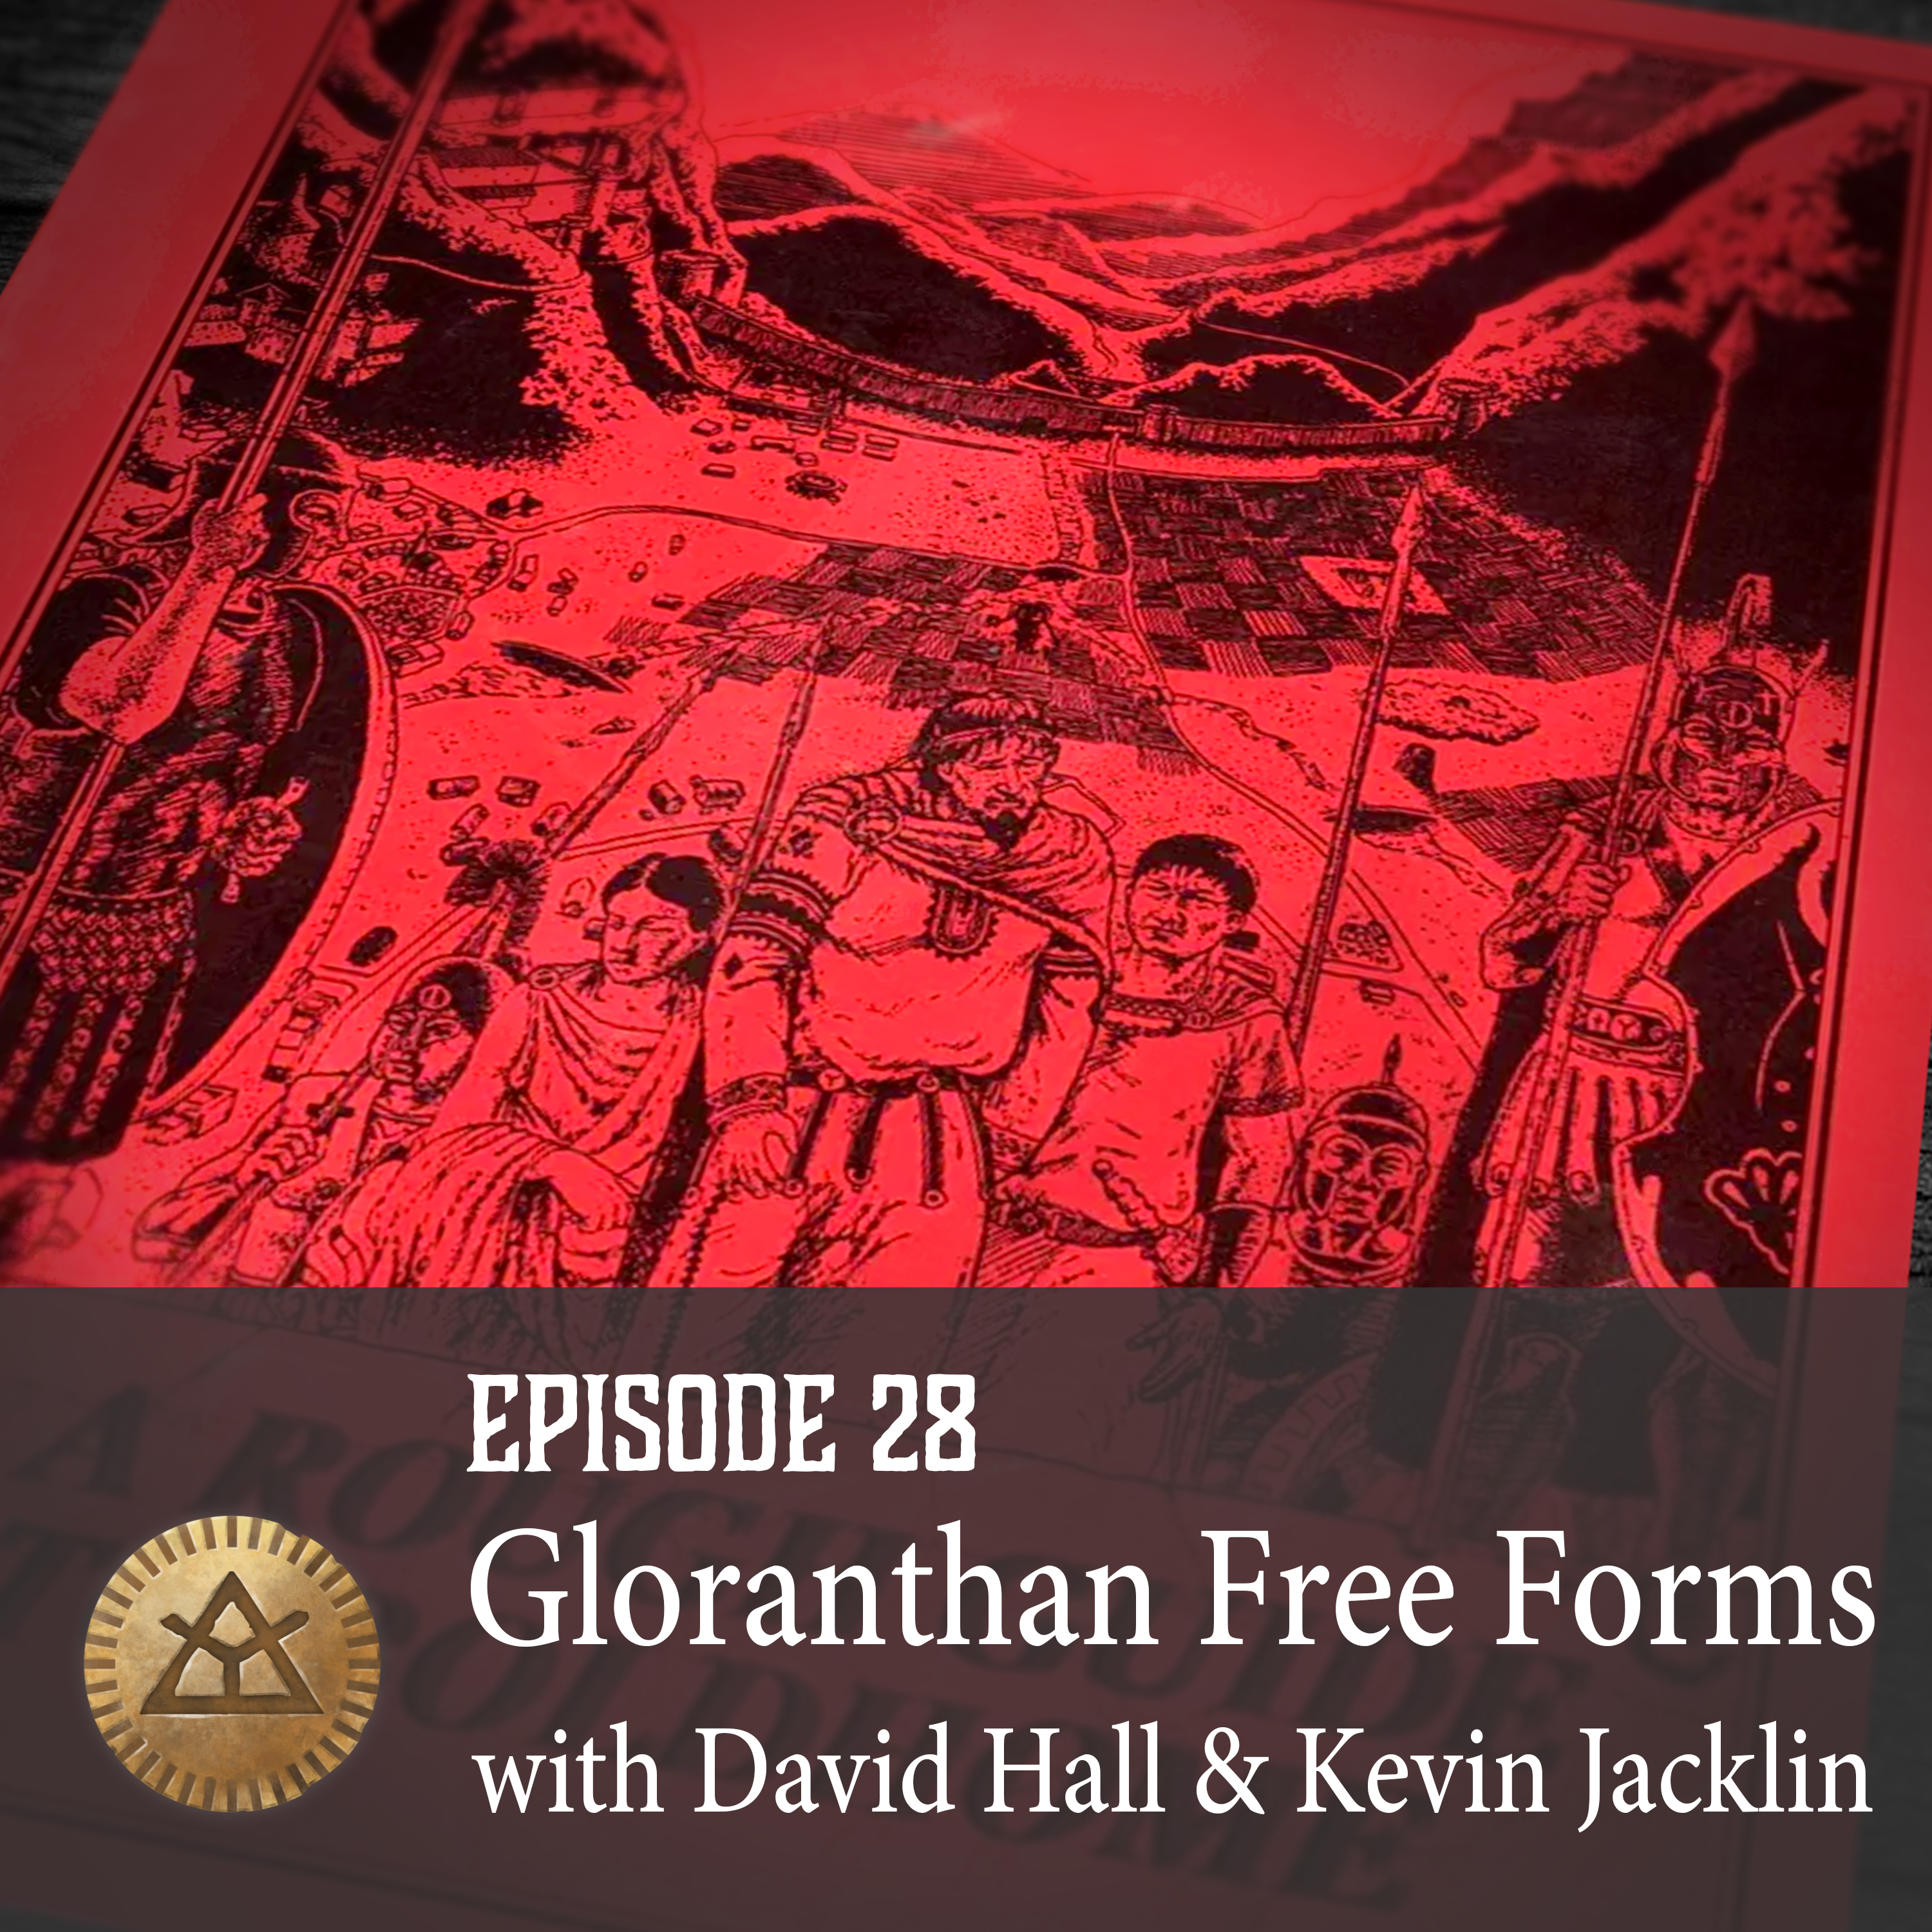 Episode 28: Gloranthan Free Forms